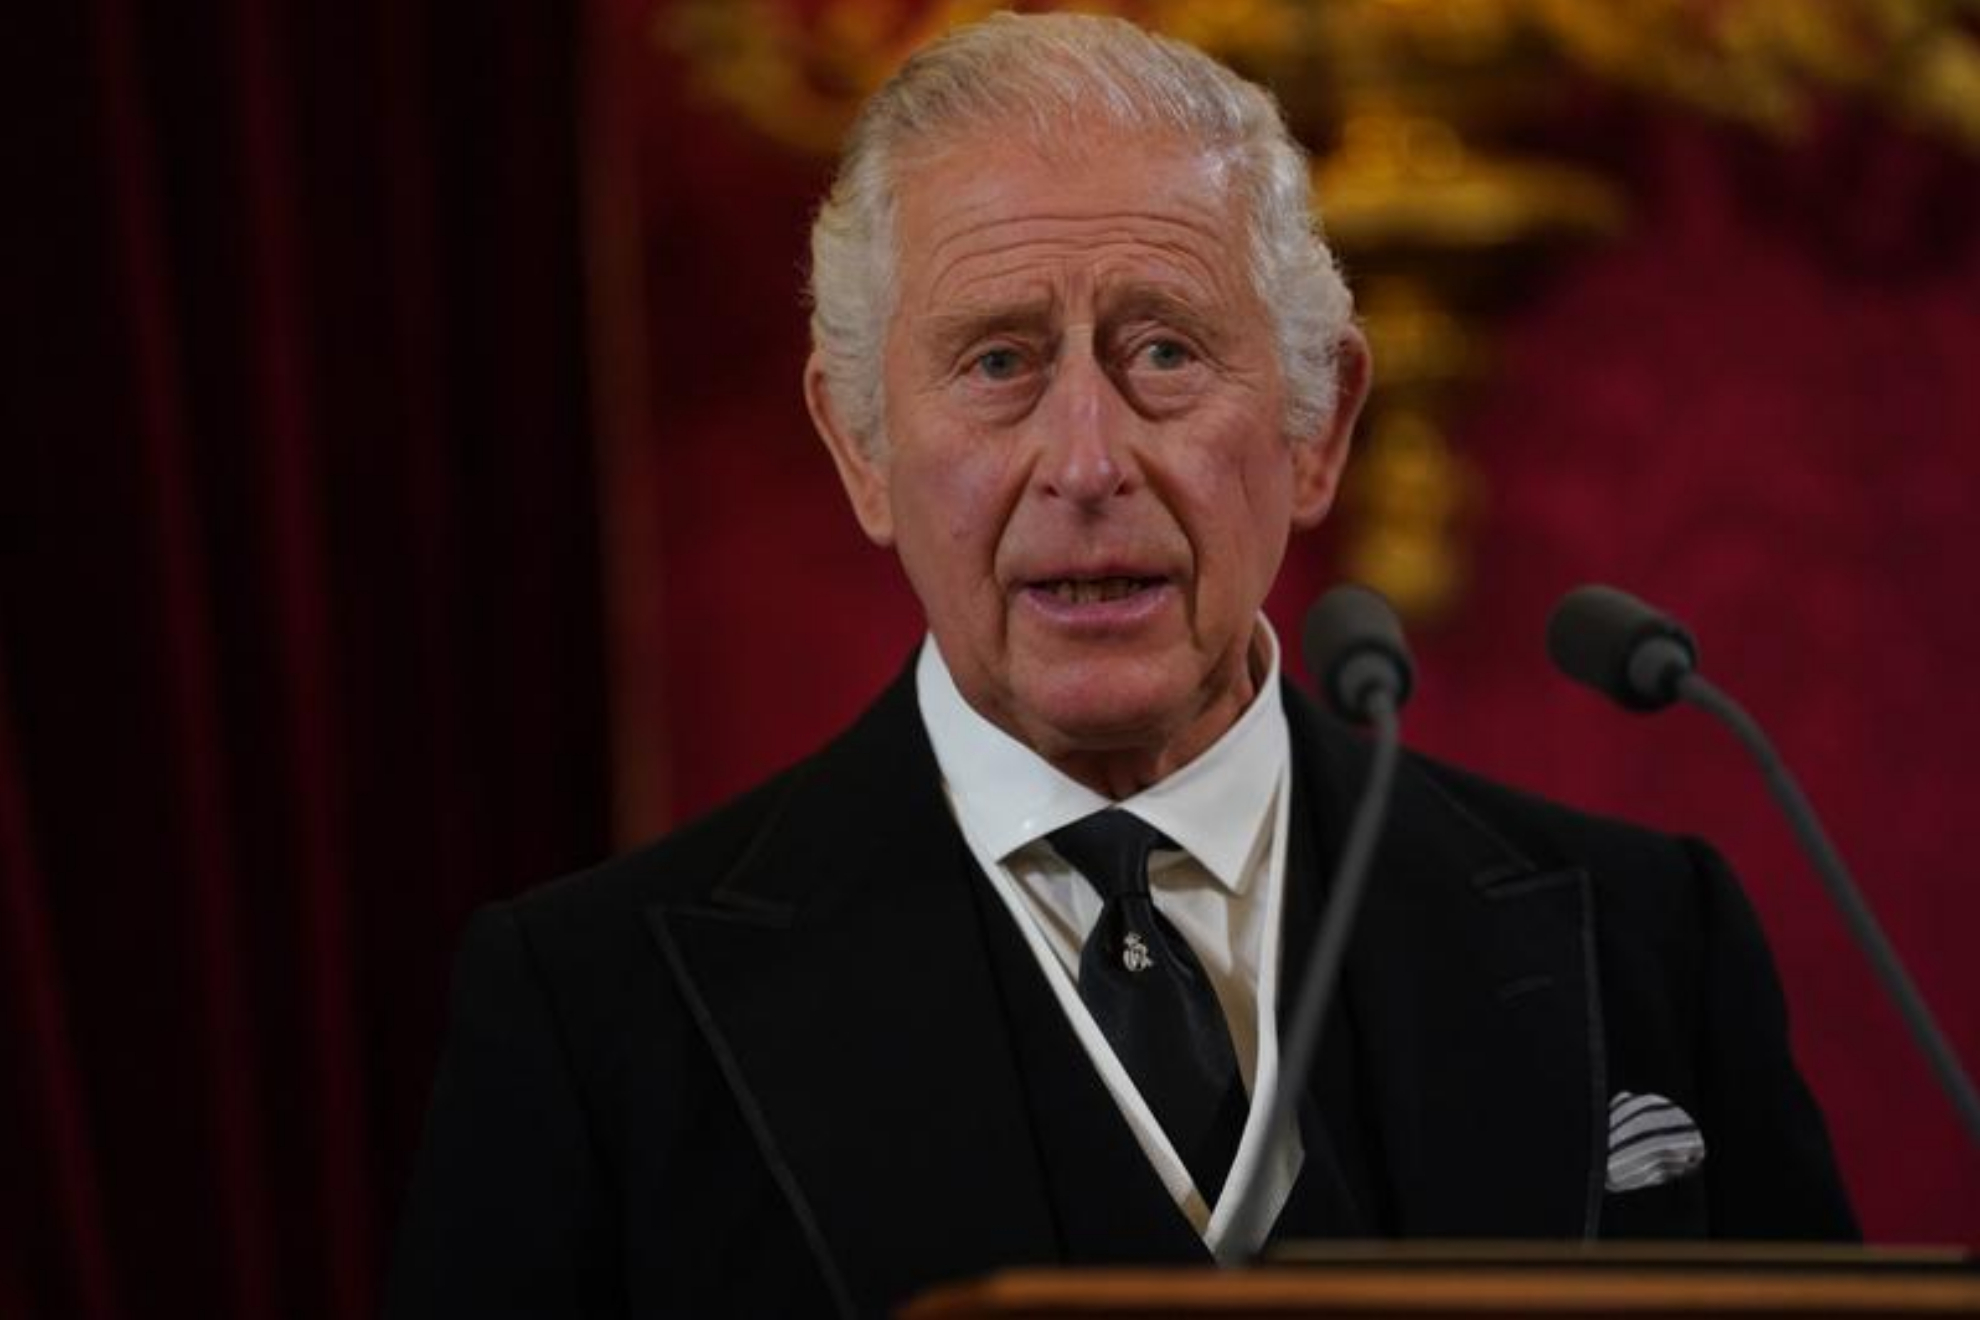 King Charles III during the Accession Council at St James's Palace in London. - Victoria Jones/Pool Photo via AP